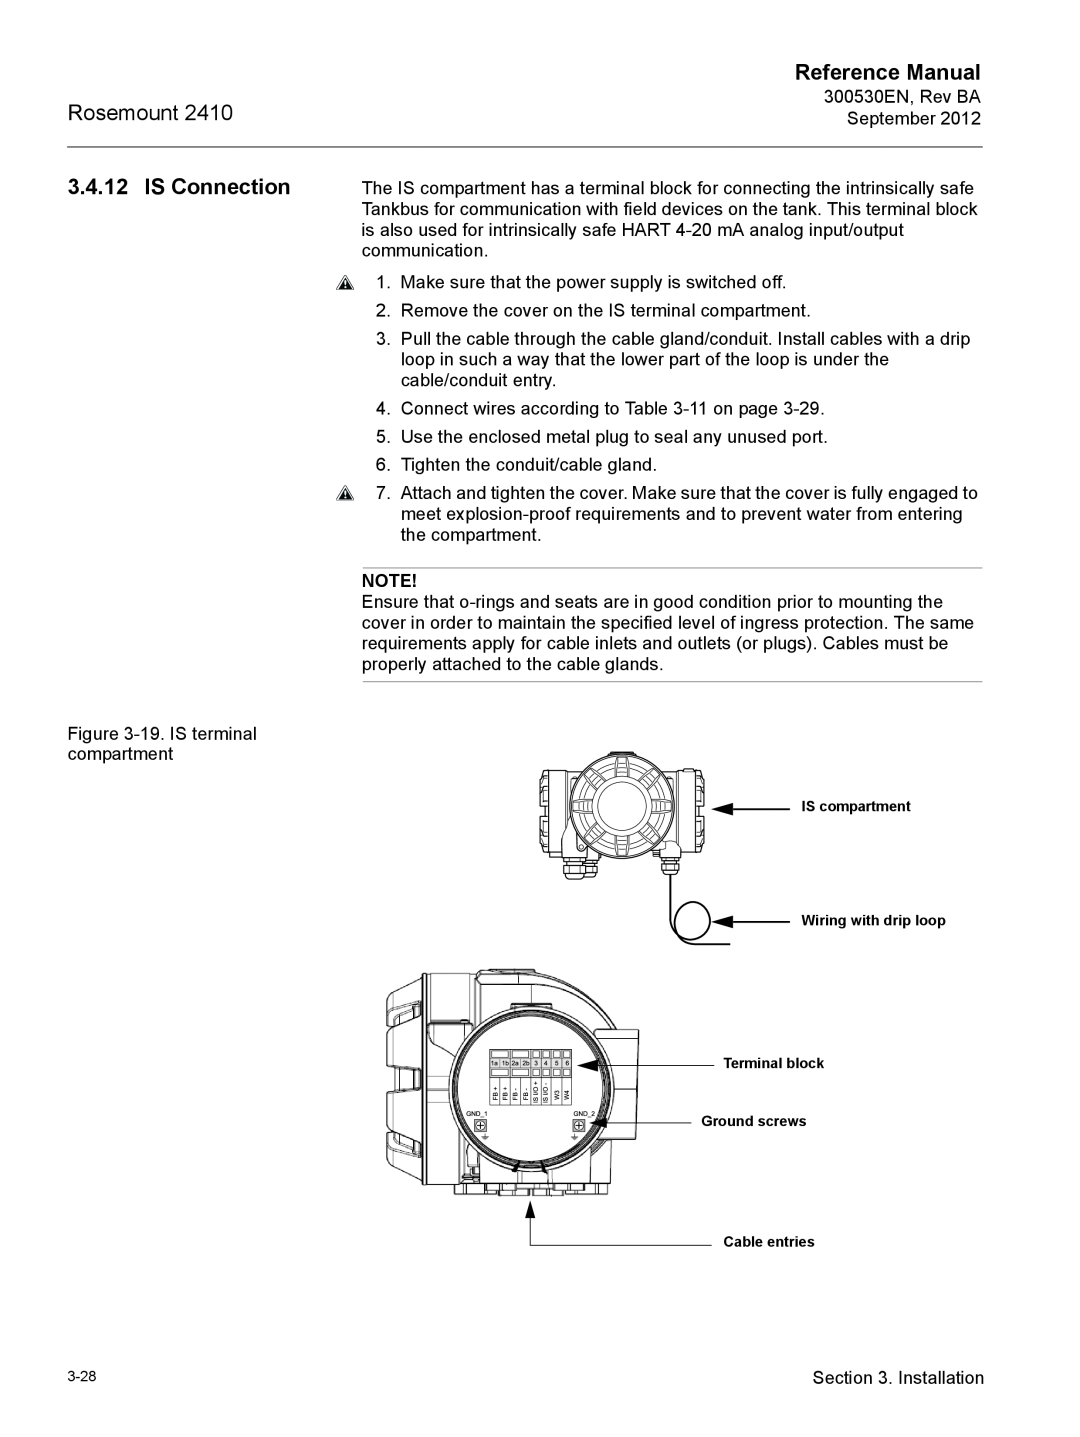 Emerson Process Management Rosemount 2410 manual IS Connection, Reference Manual, Cable entries 